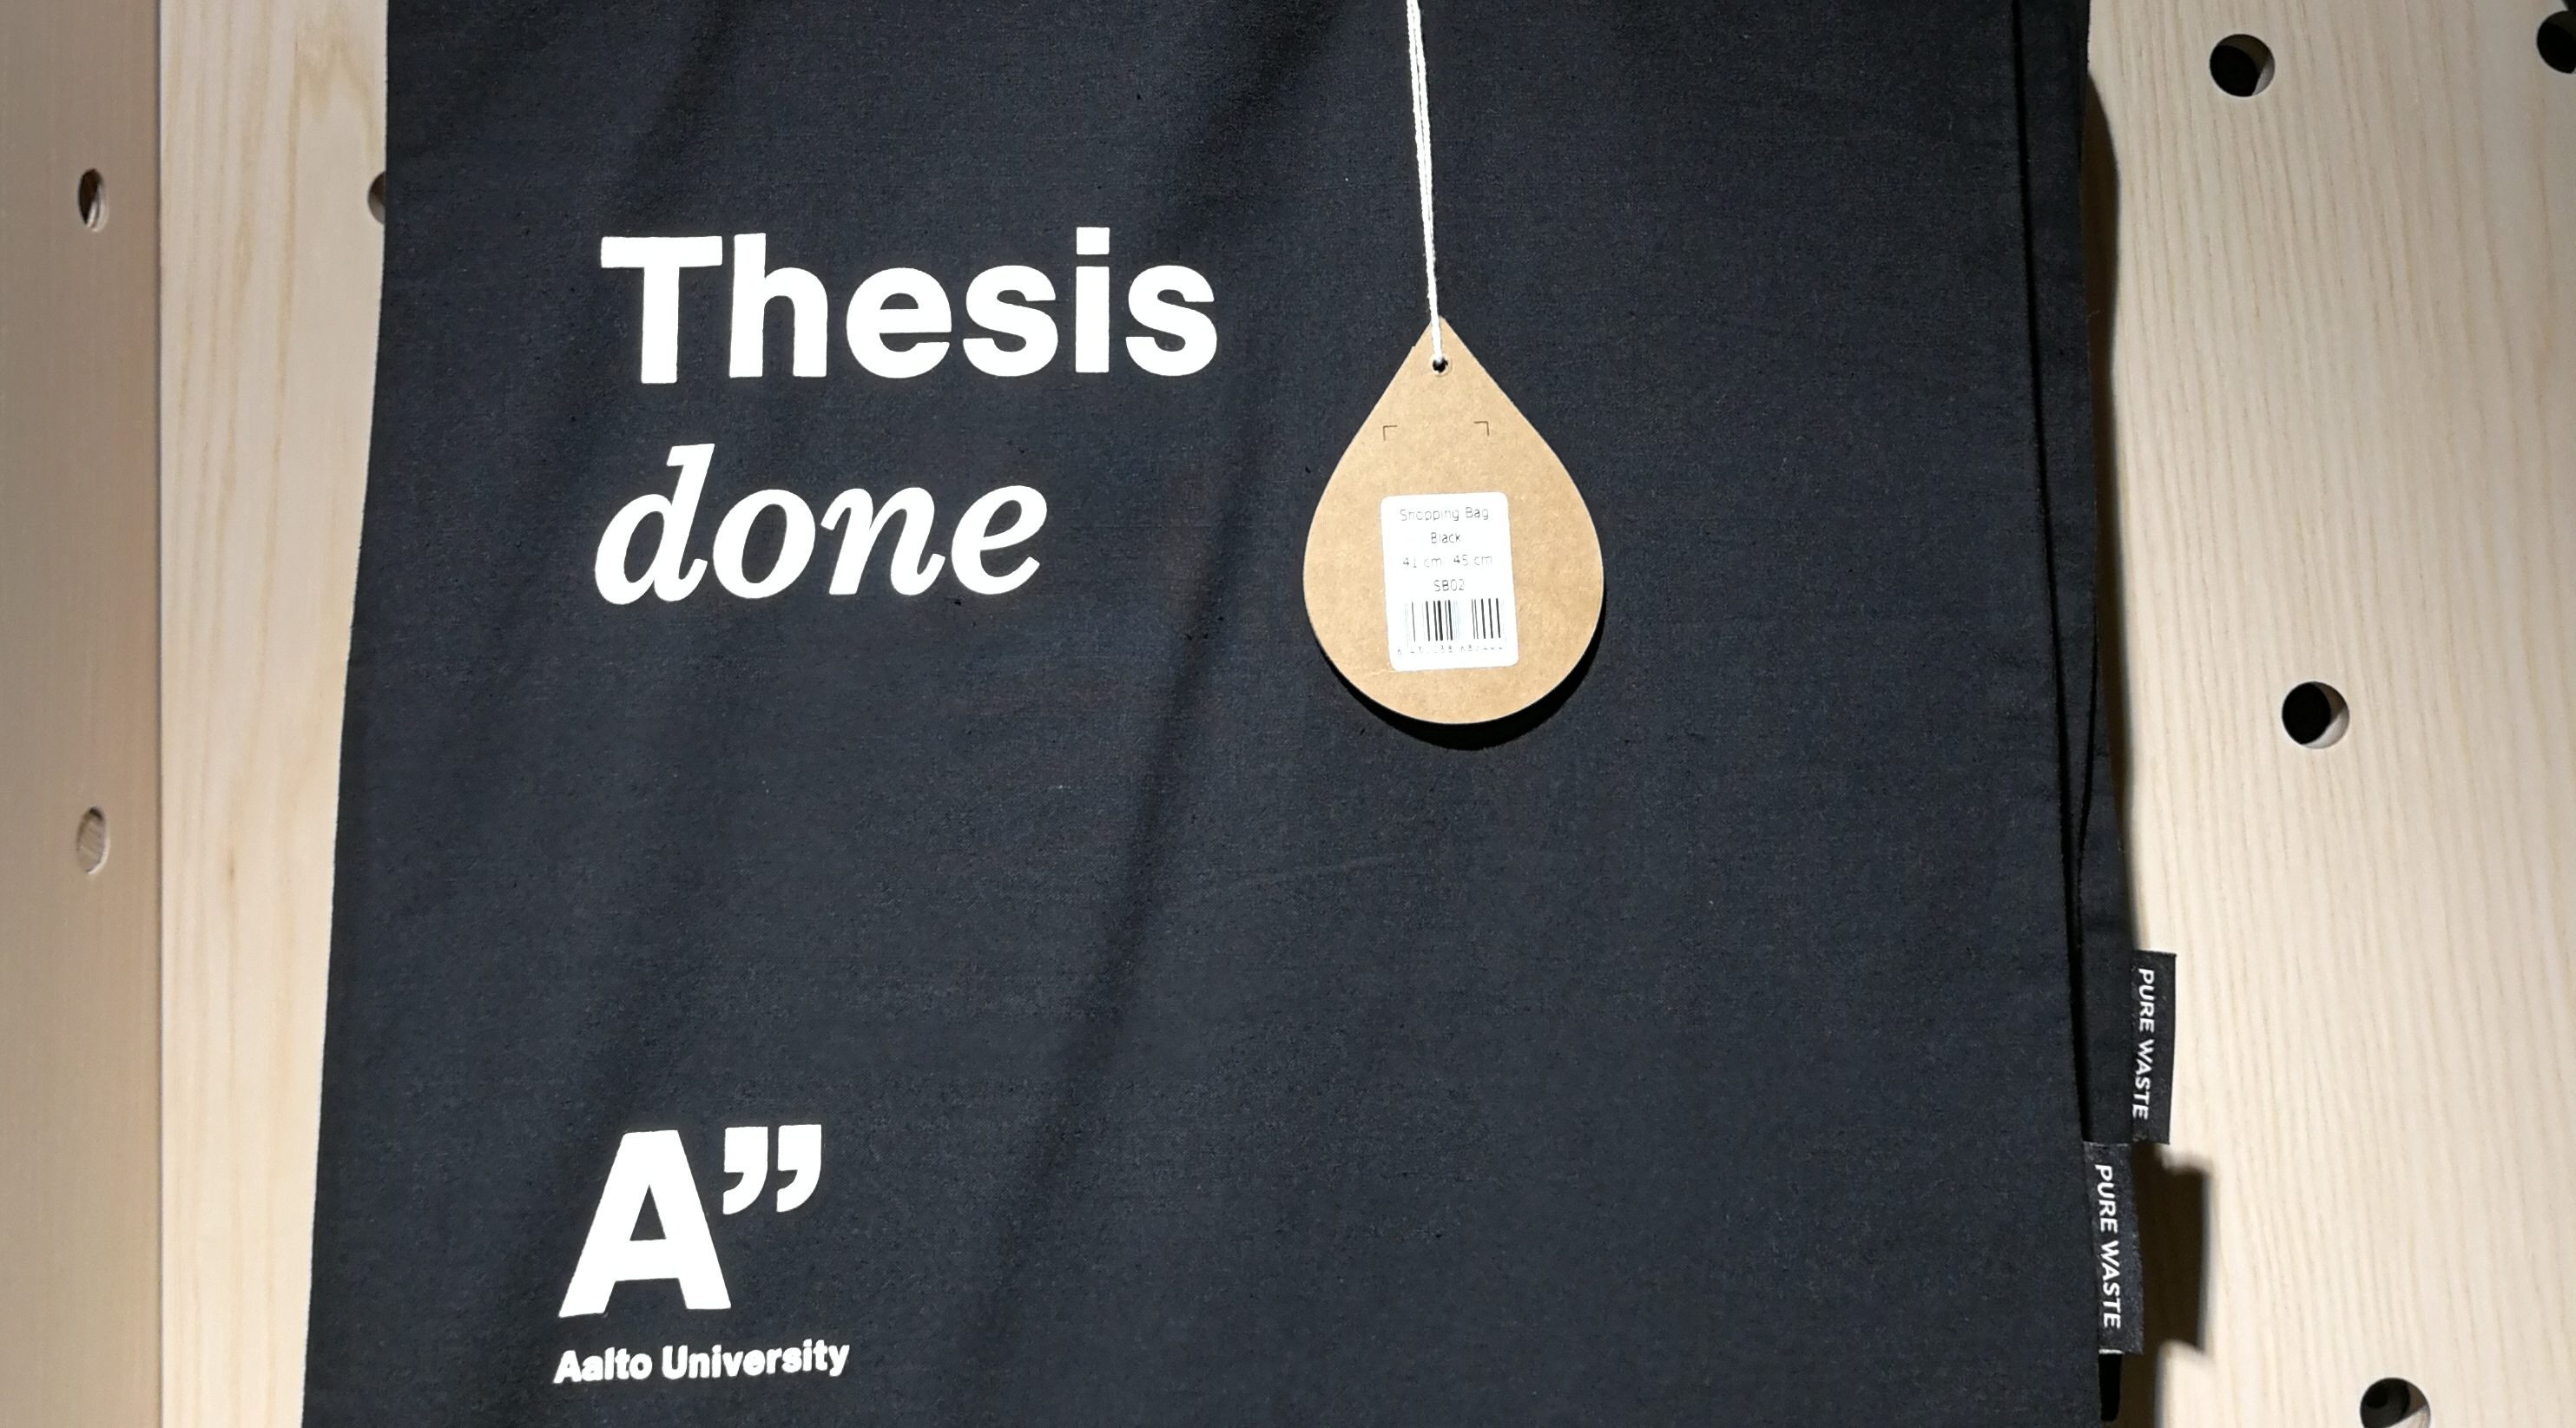 Aalto University shopping bag: Thesis done